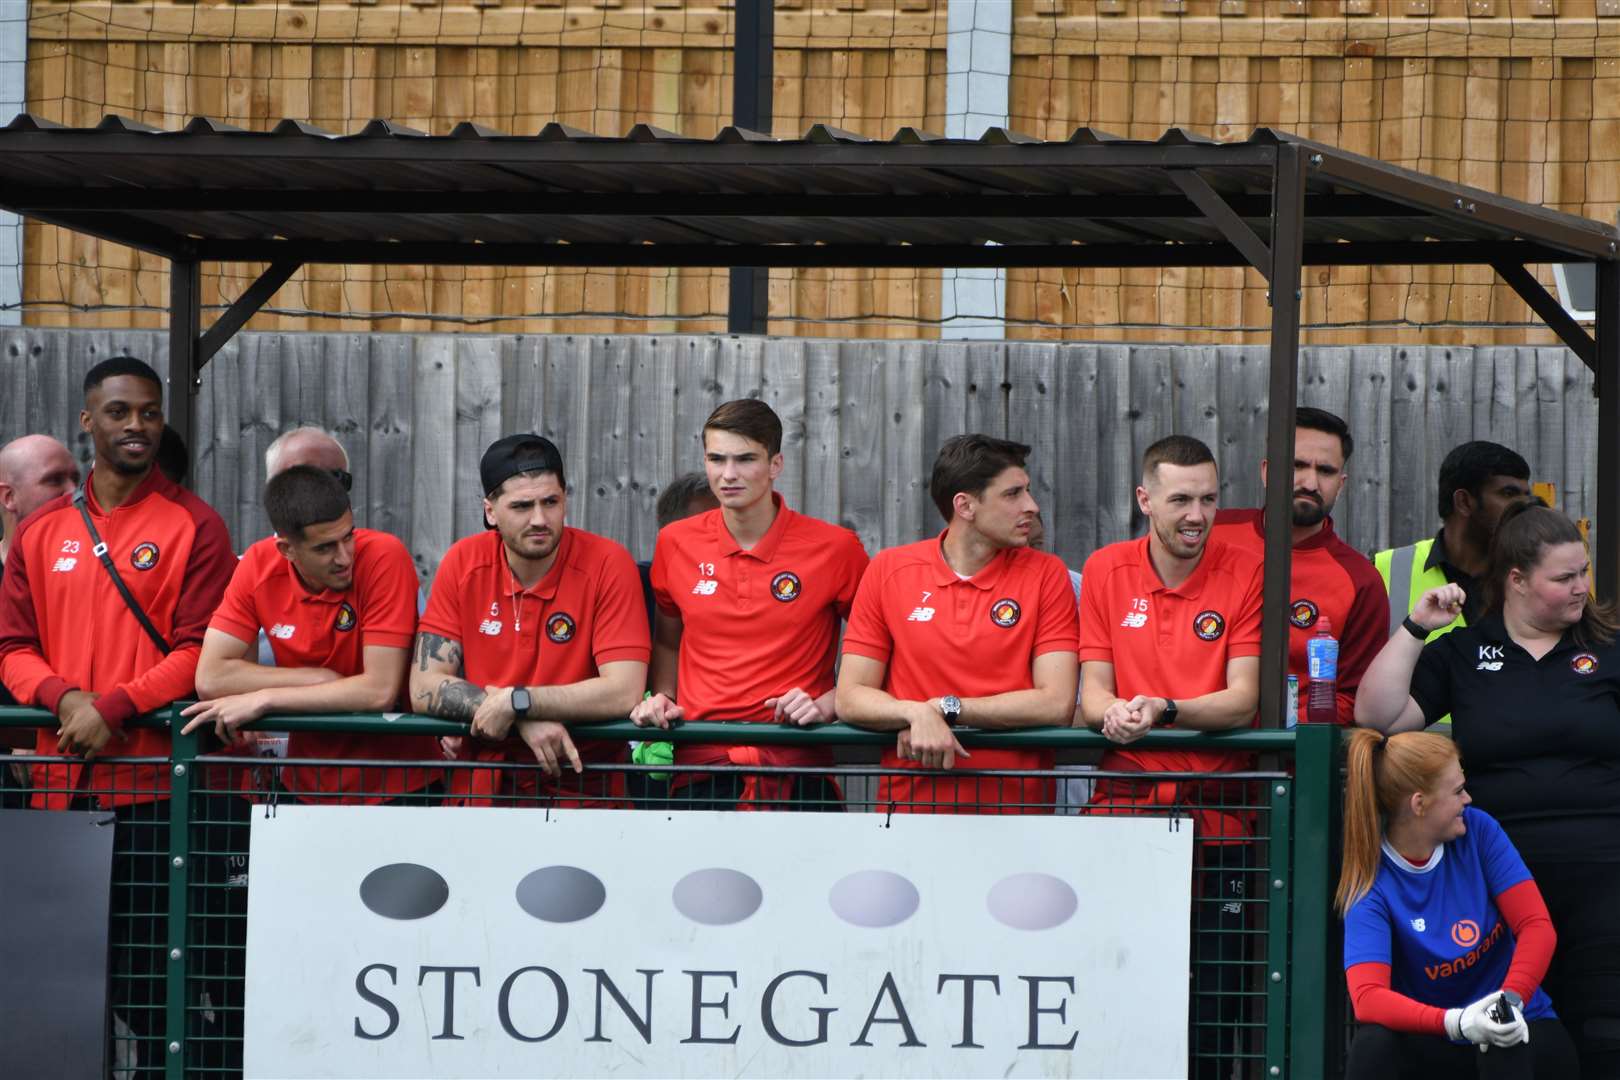 Ebbsfleet's non-playing squad members watch on from the sidelines. Picture: Barry Goodwin